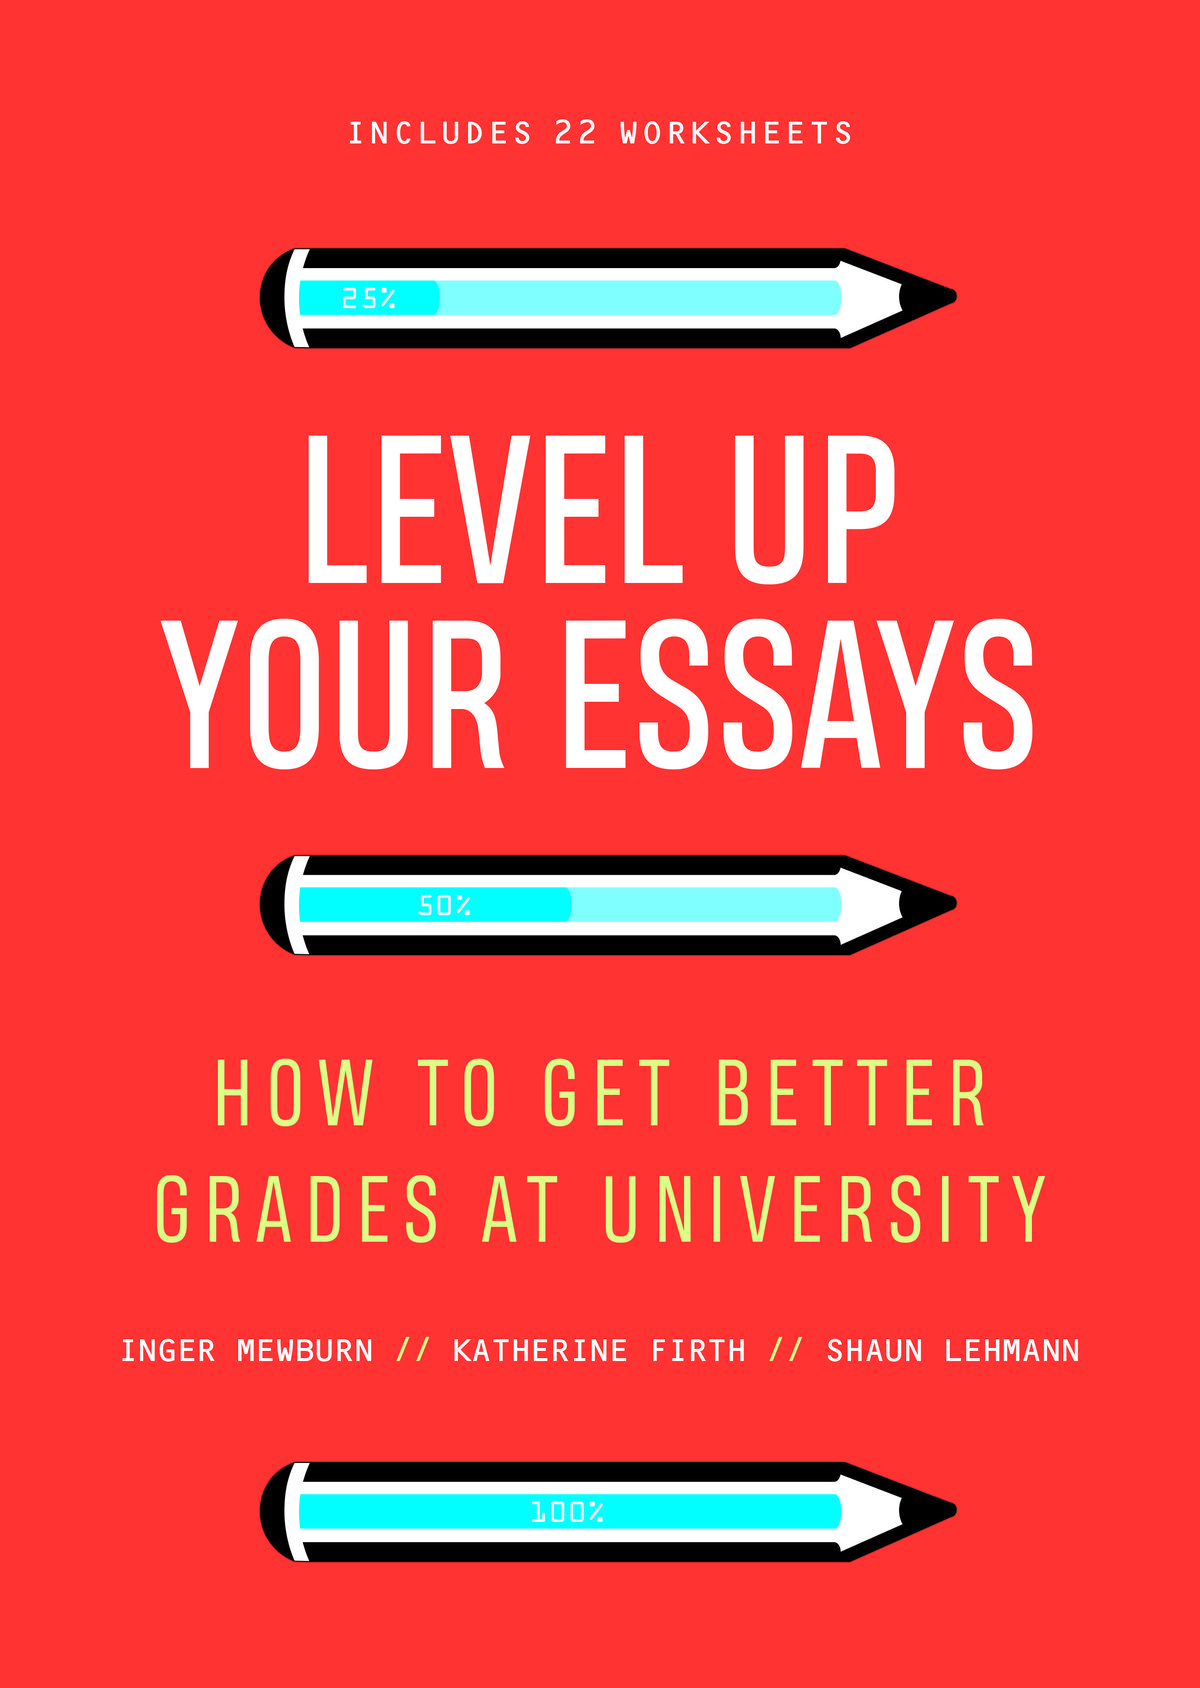 Level up your essays